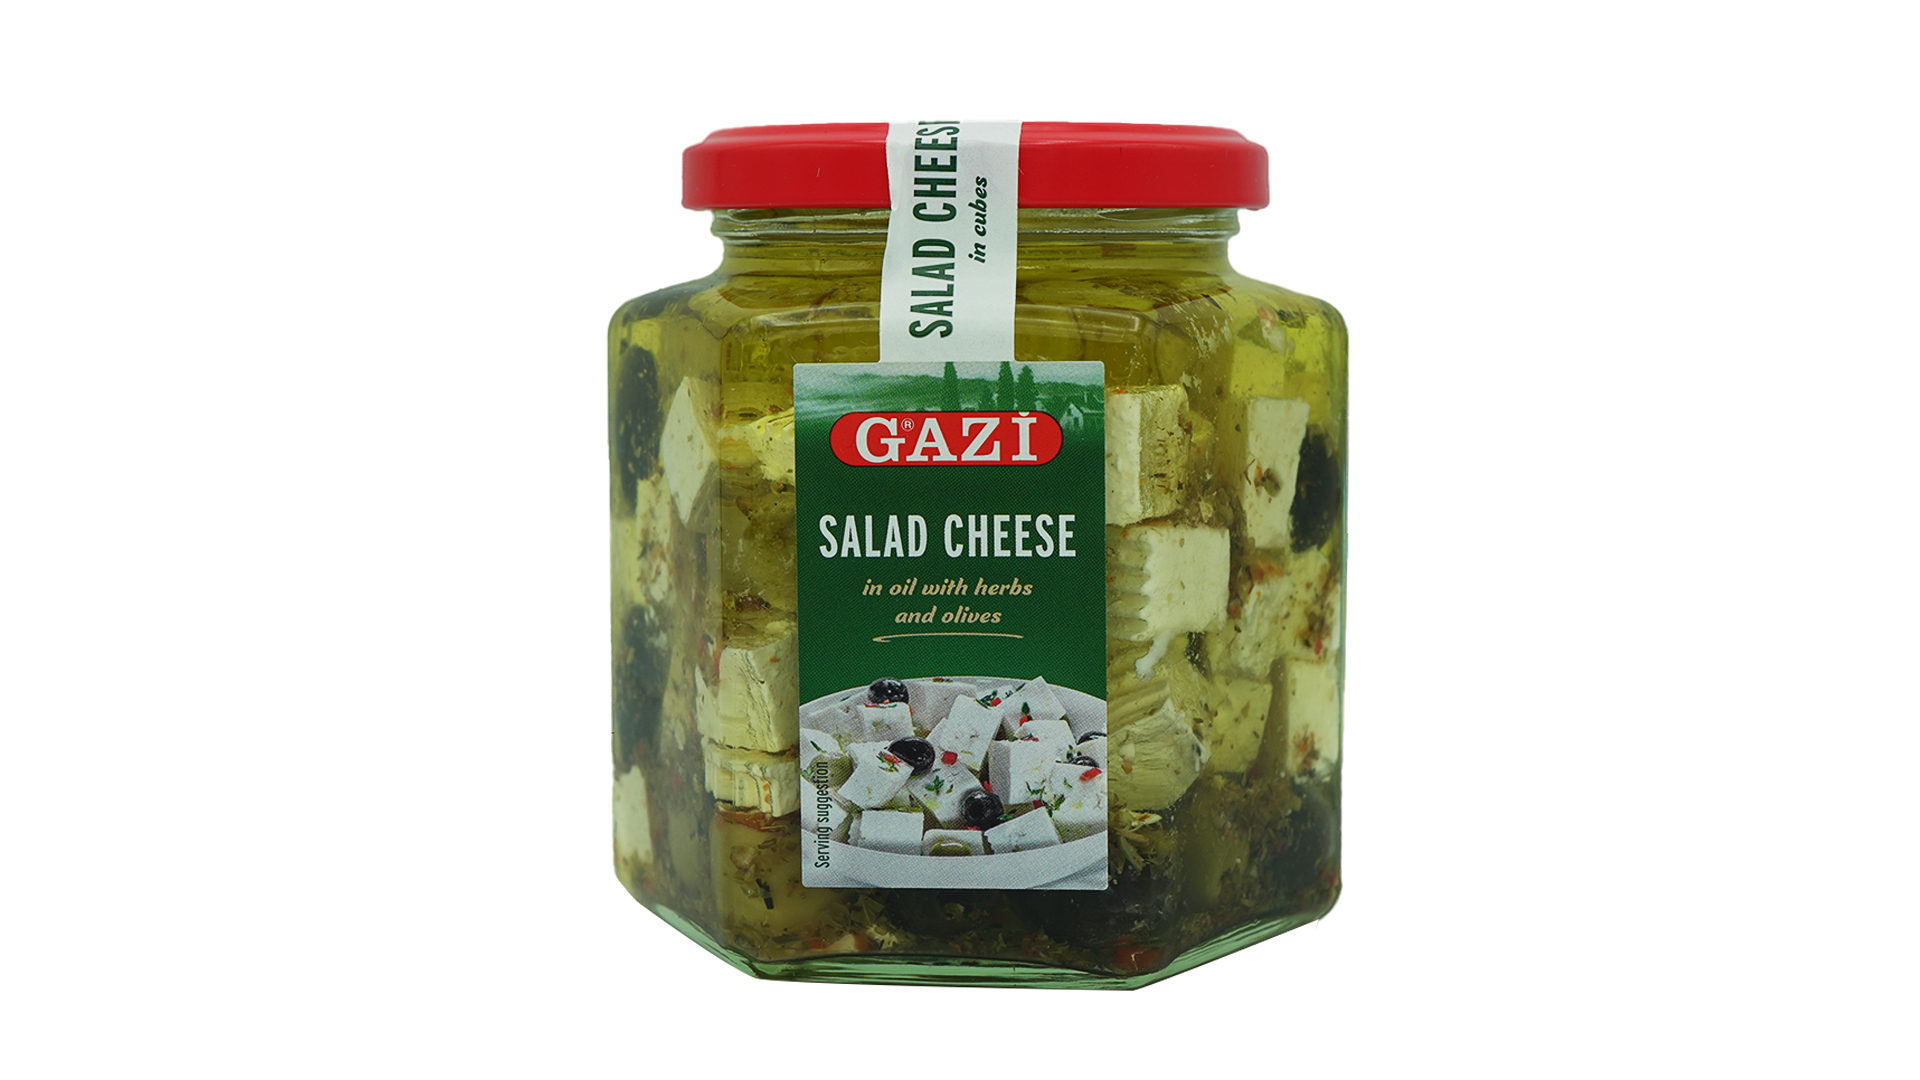 Gazi salad cheese in oil with herbs 375g 2